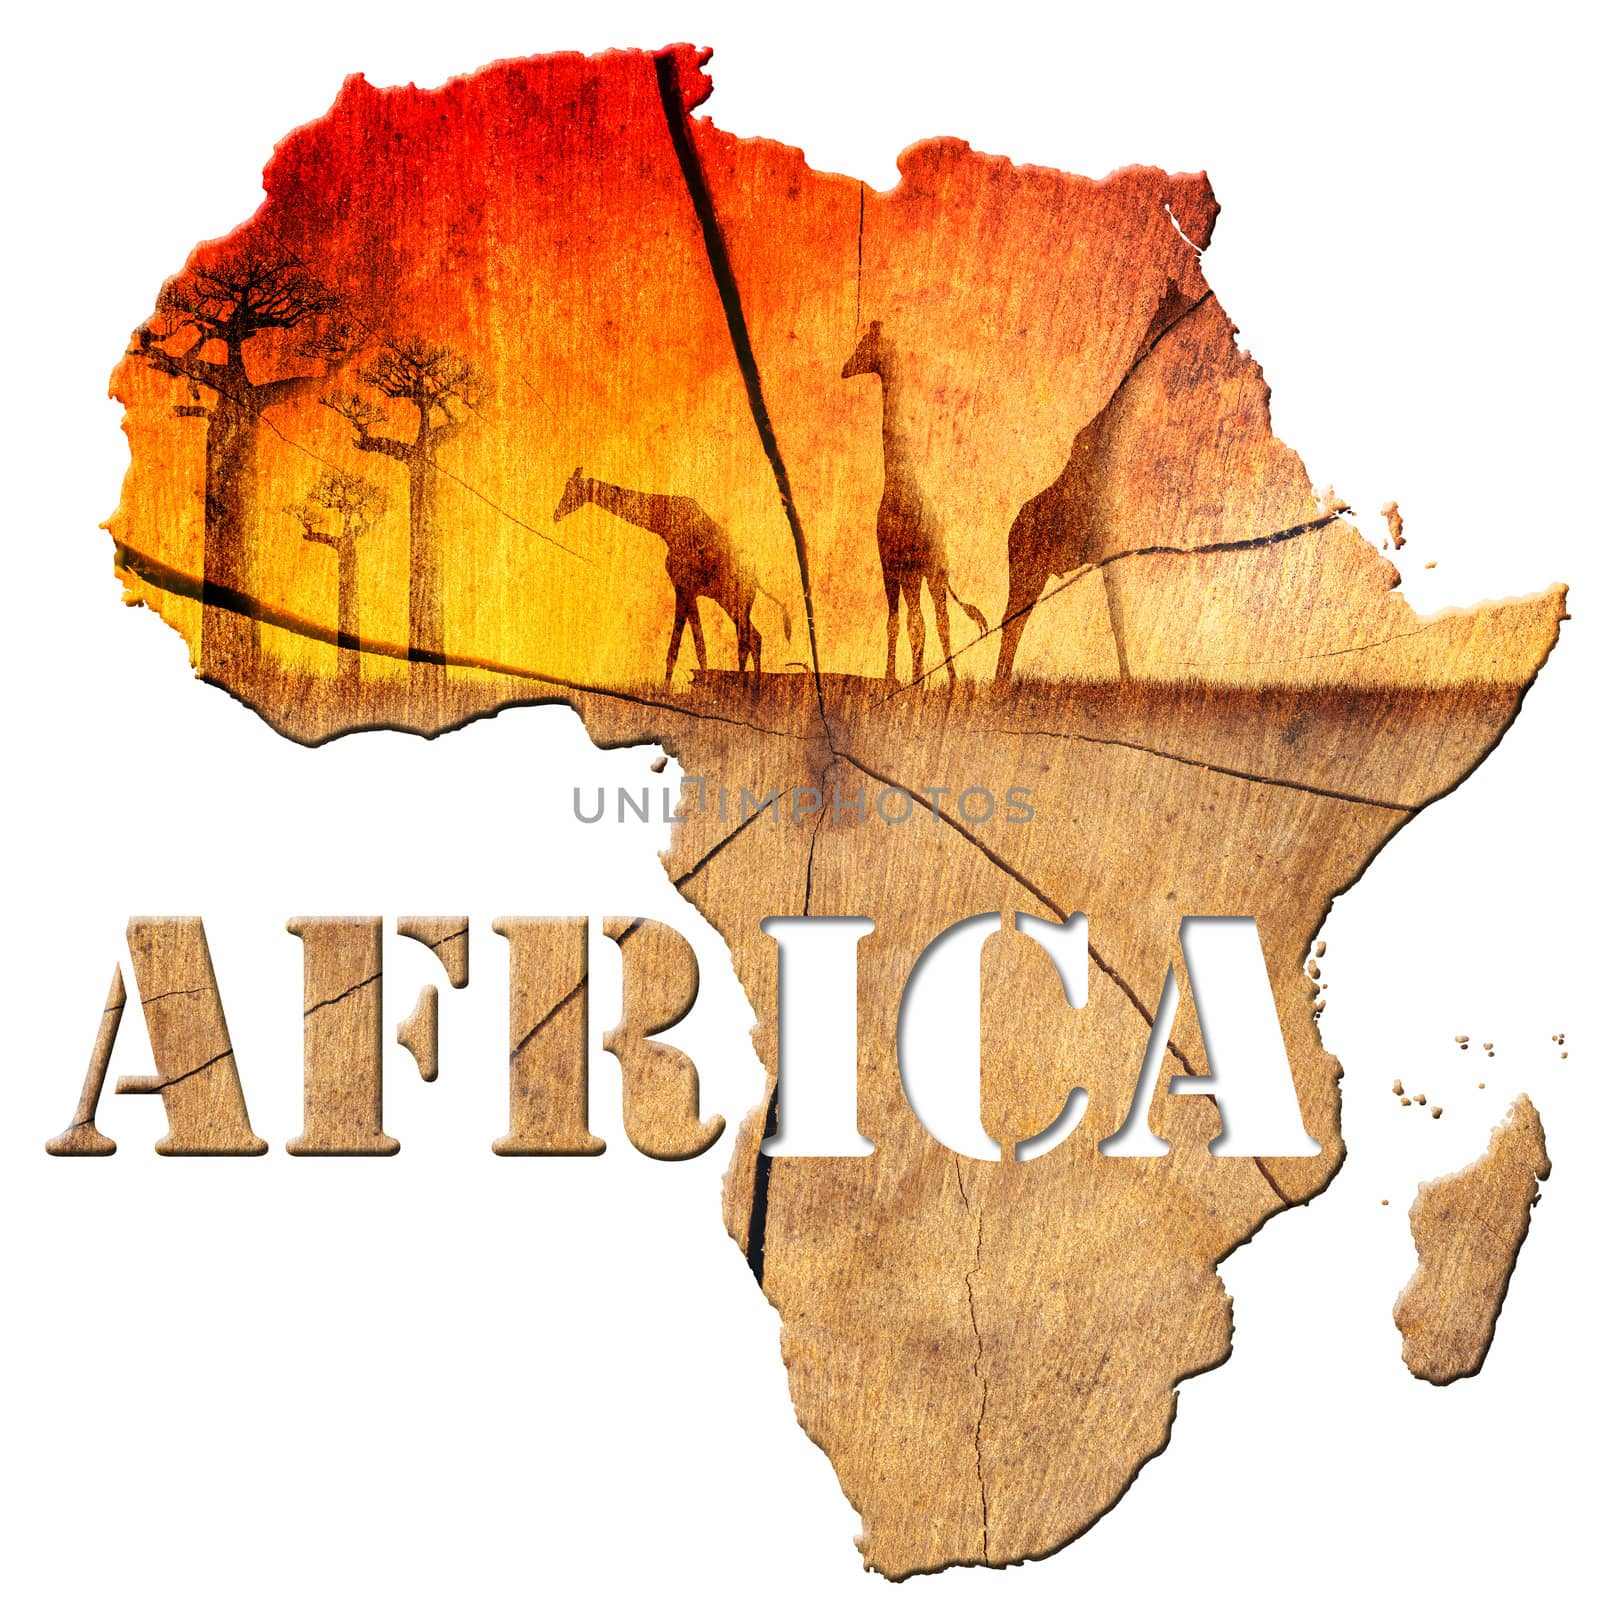 Africa map with wood texture and colorful landscape of fantasy, with baobab trees and giraffes